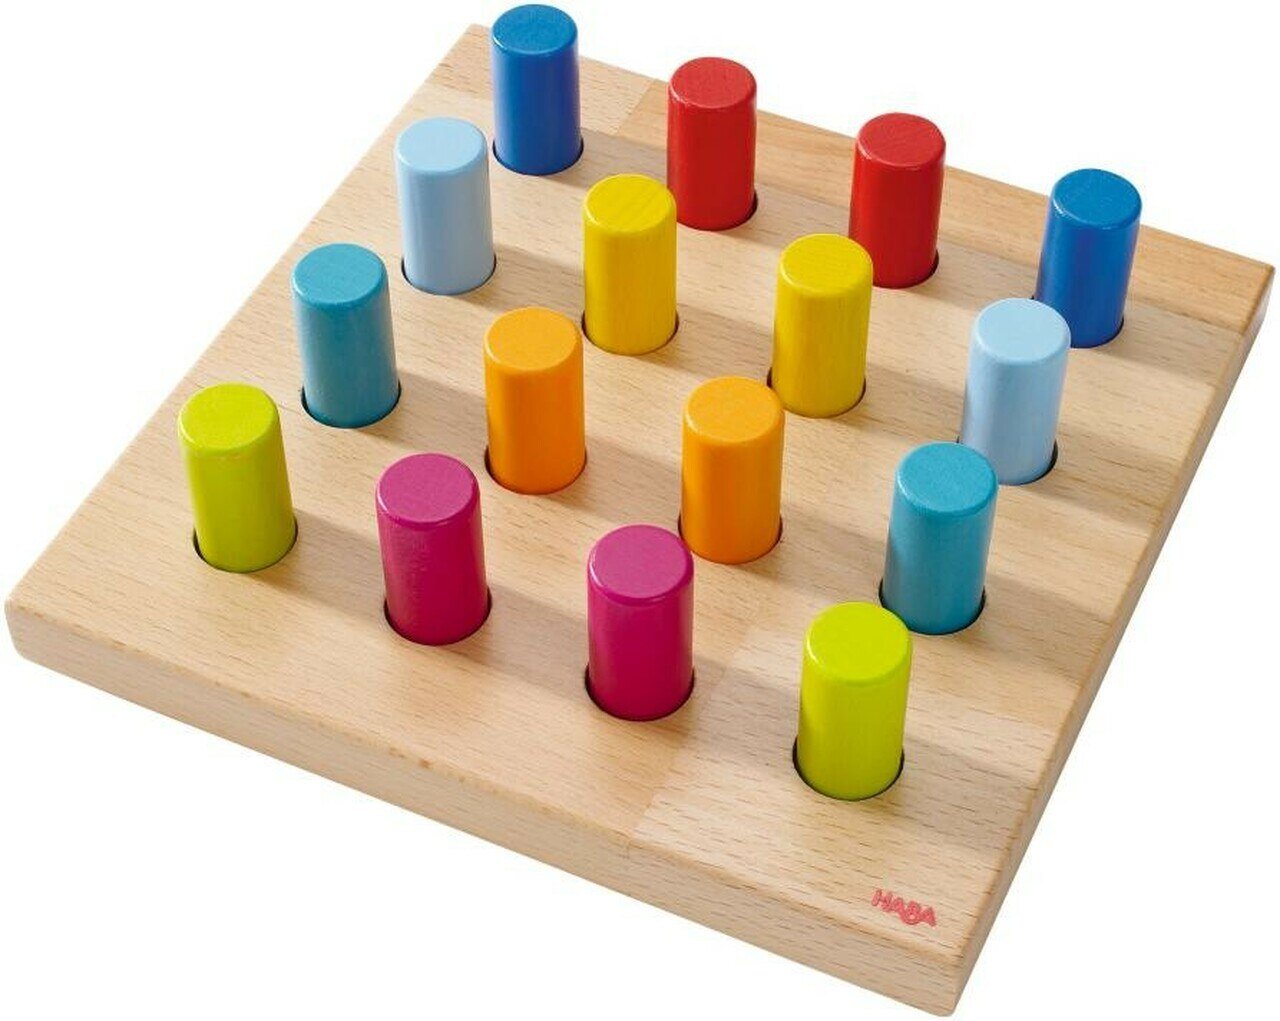 HABA Rainbow Whirls Pegging Game - Wood Wood Toys Canada's Favourite Montessori Toy Store